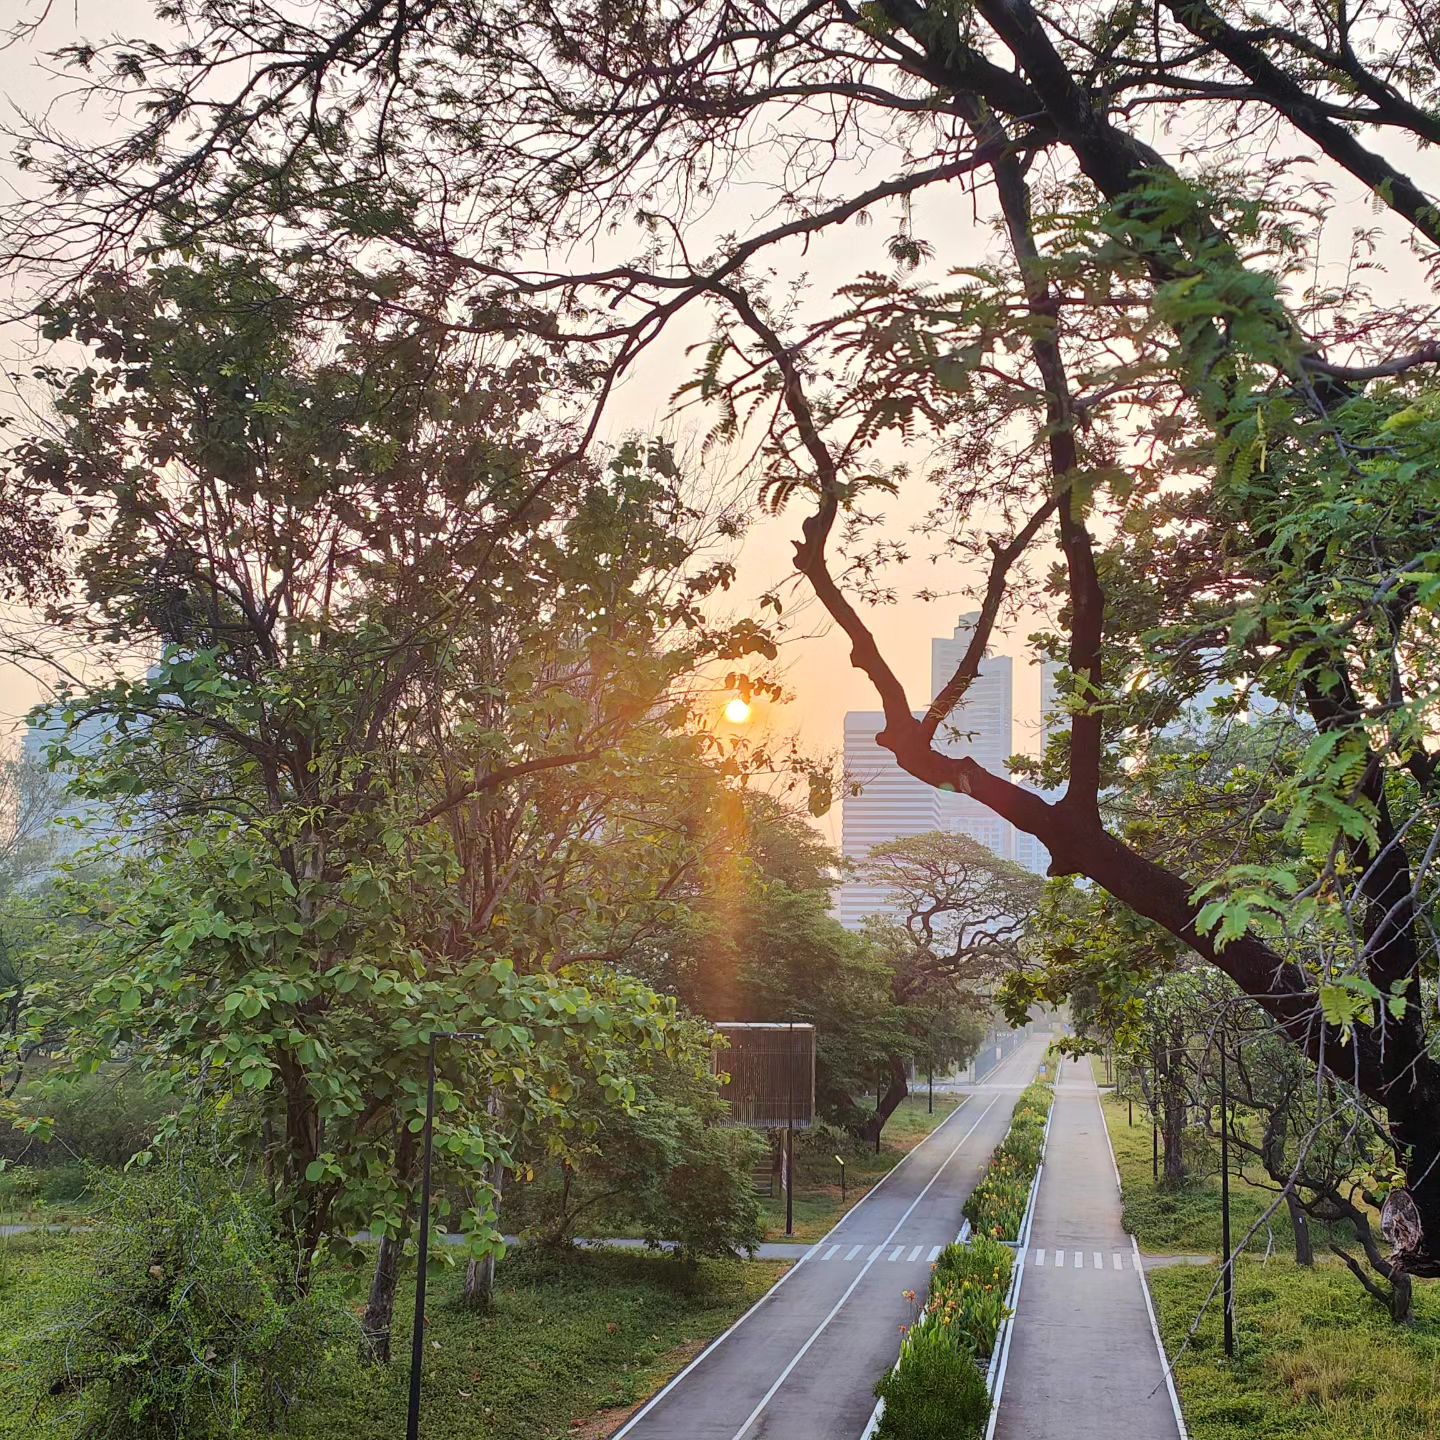 #benjakittipark mornings, are the best #mornings...